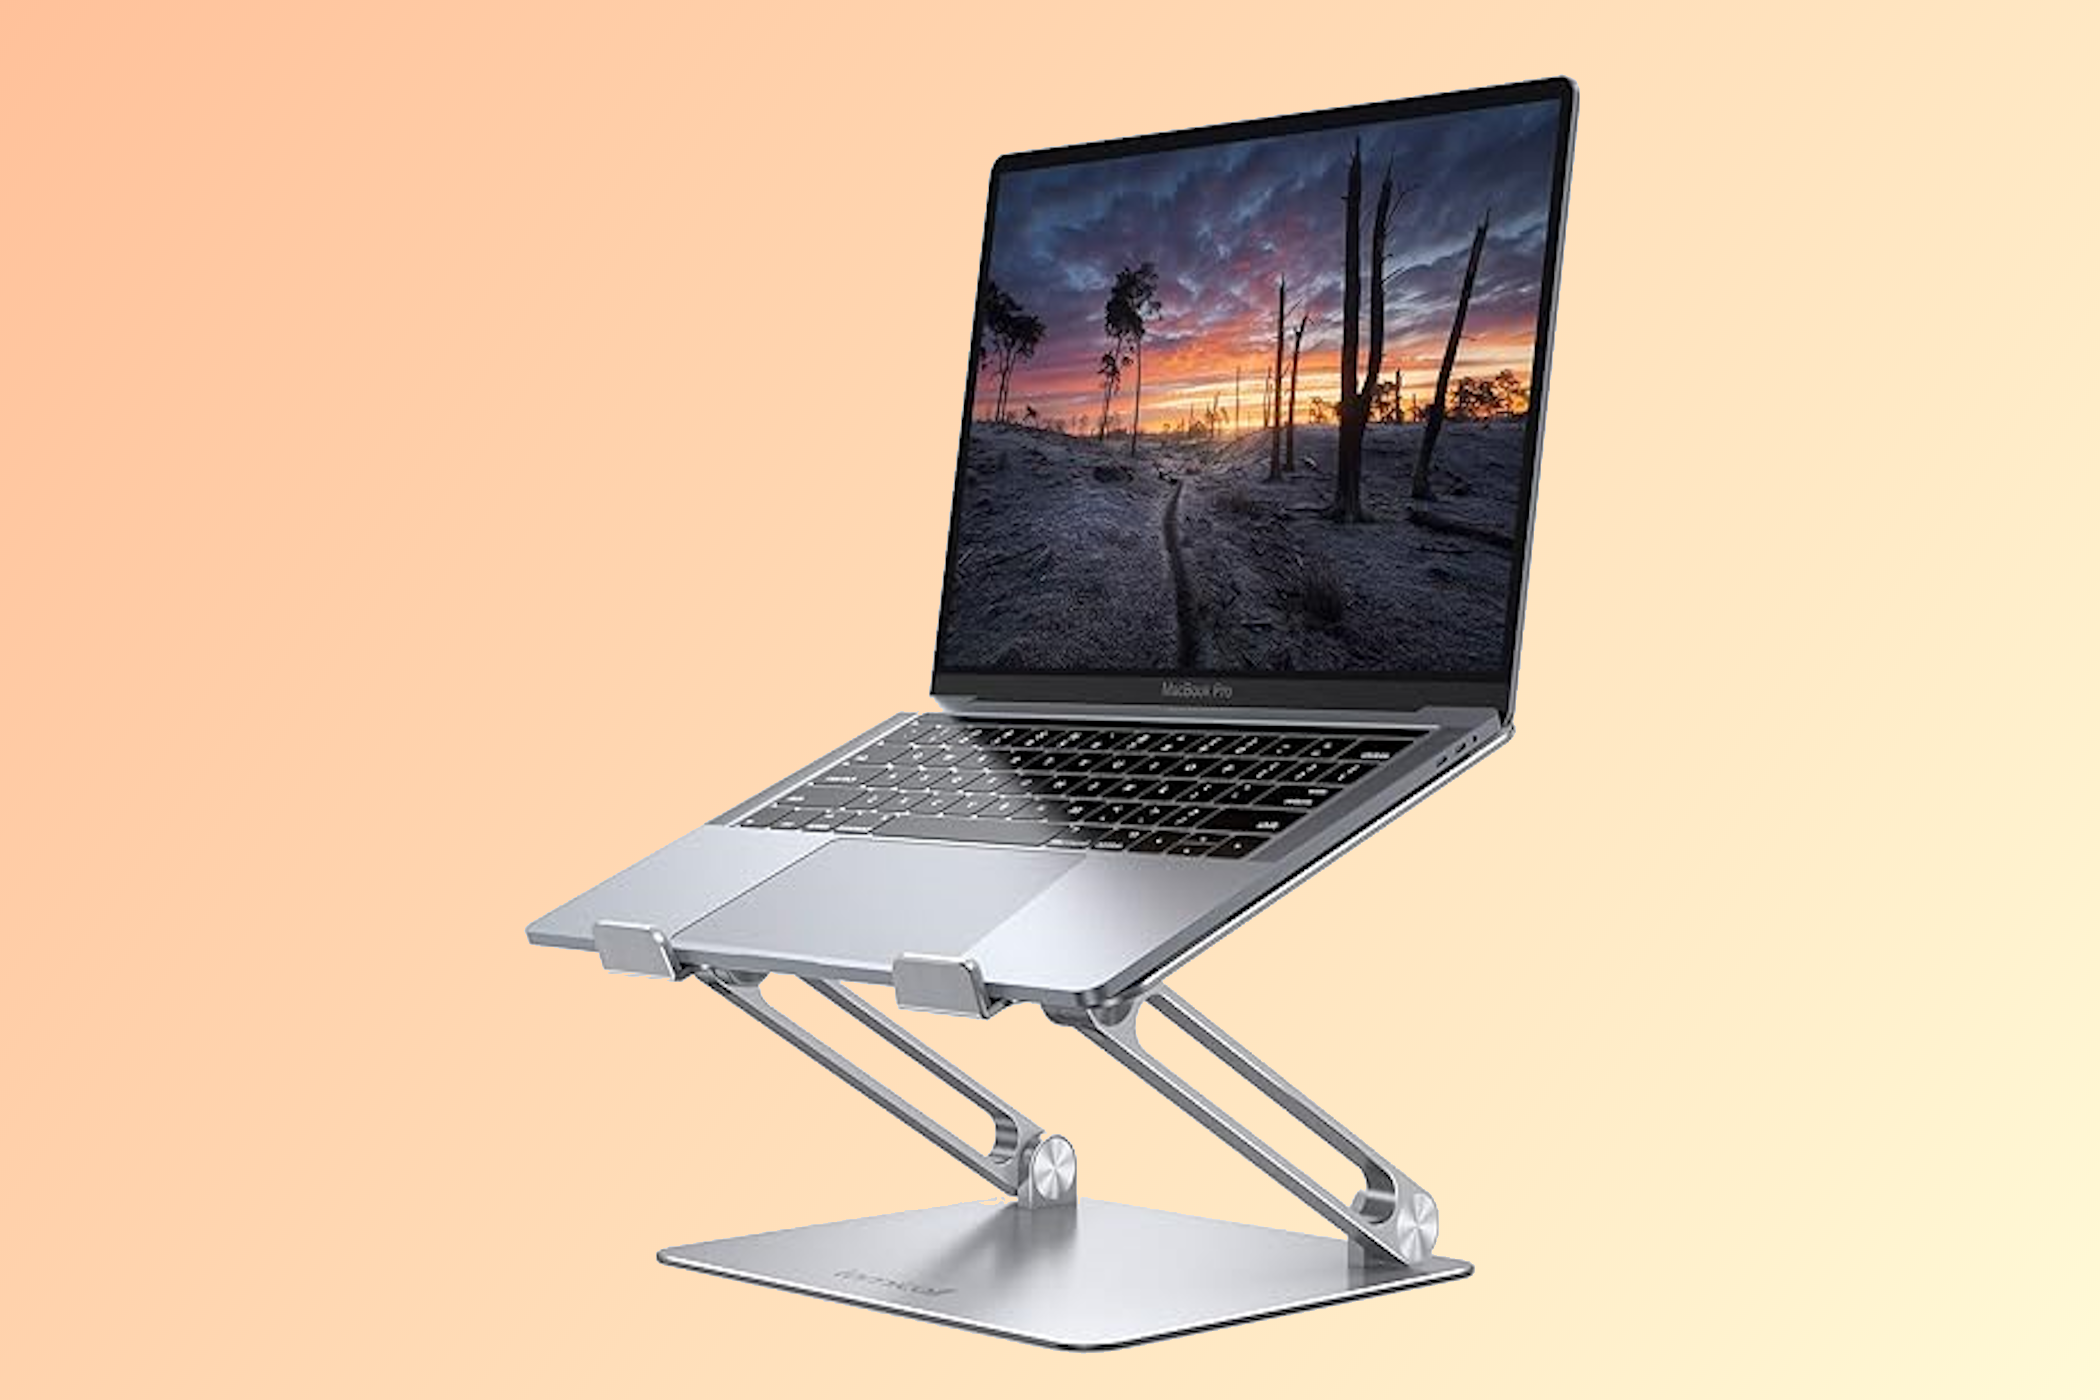 Lamicall Adjustable Laptop Stand